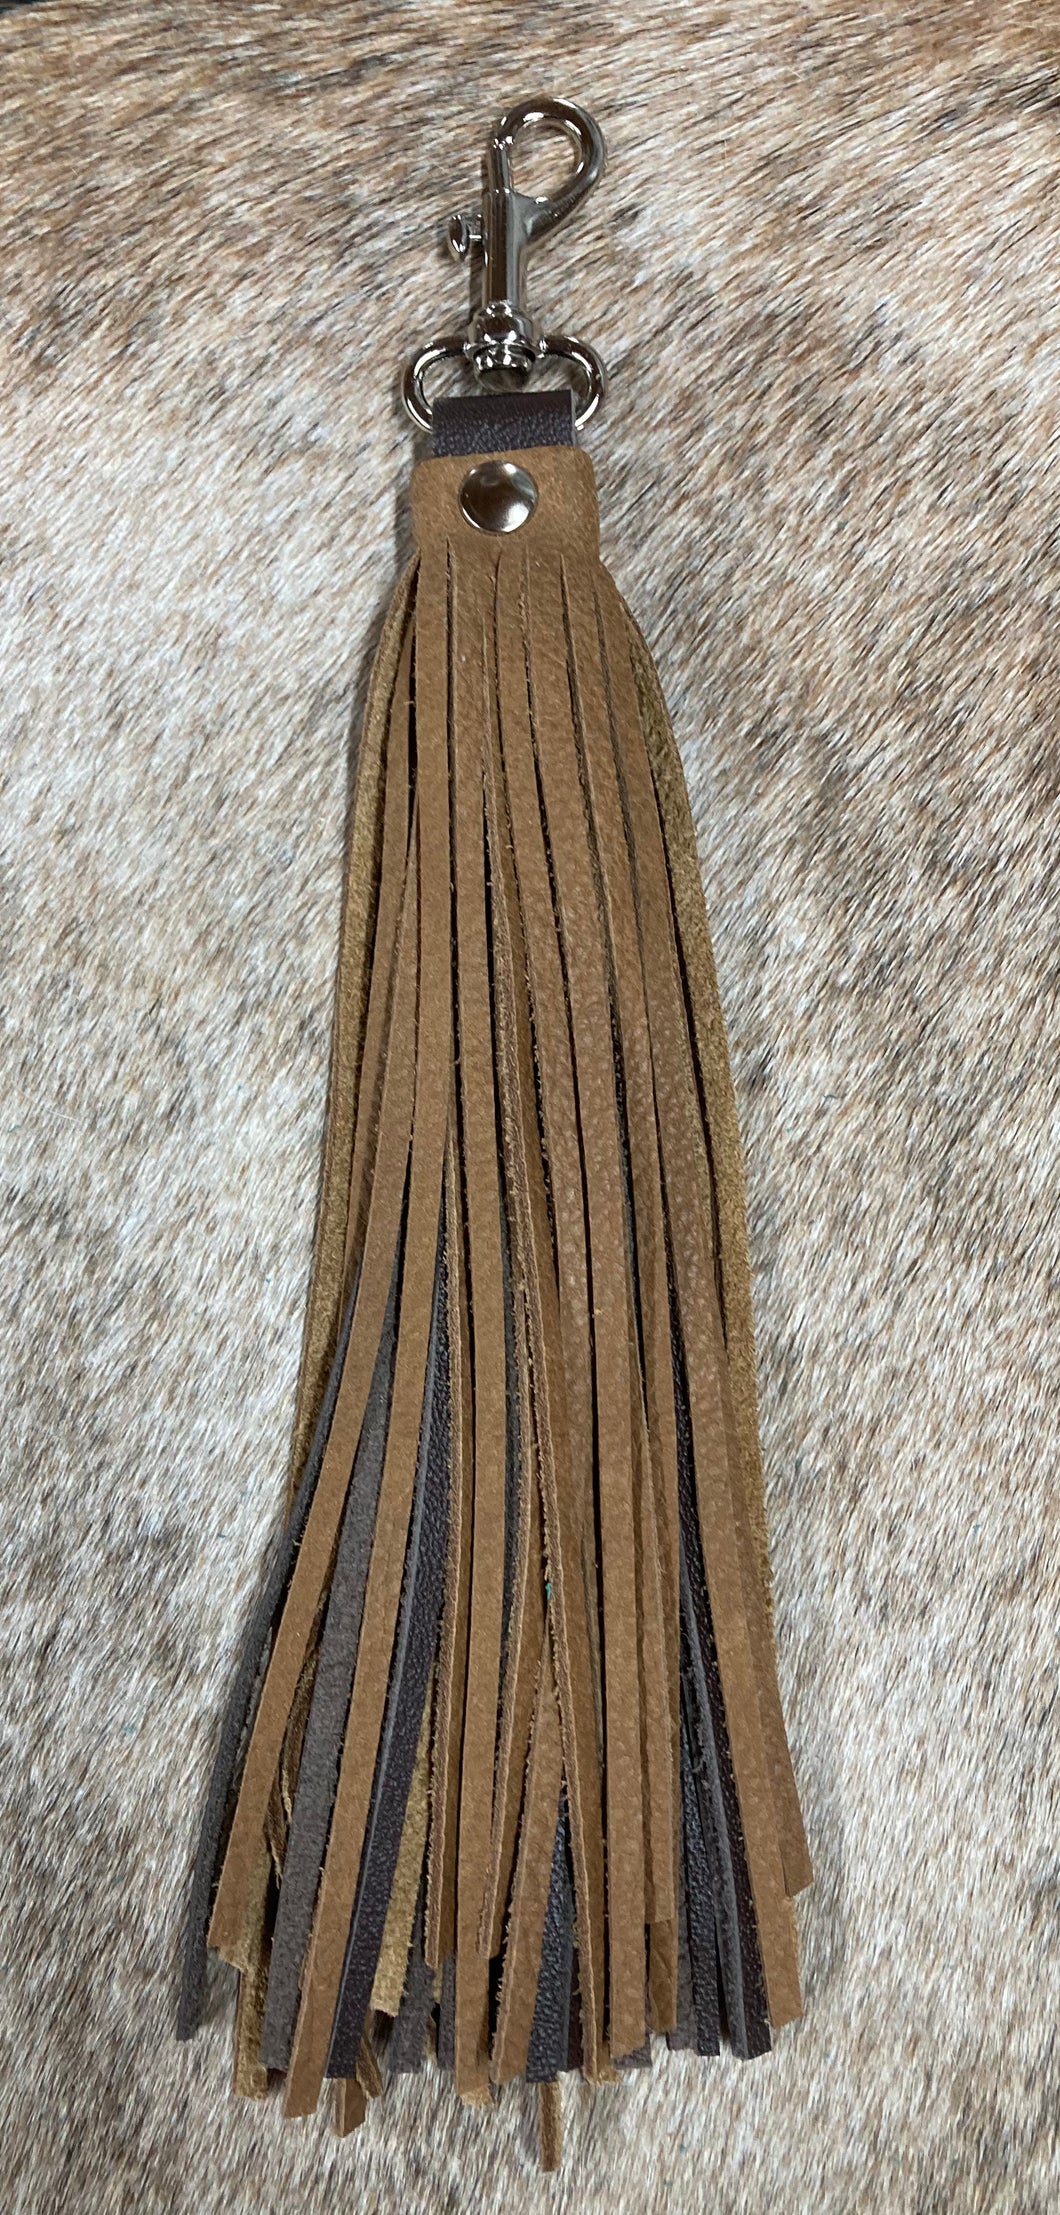 Purse Tassel - Tan and Brown Leather